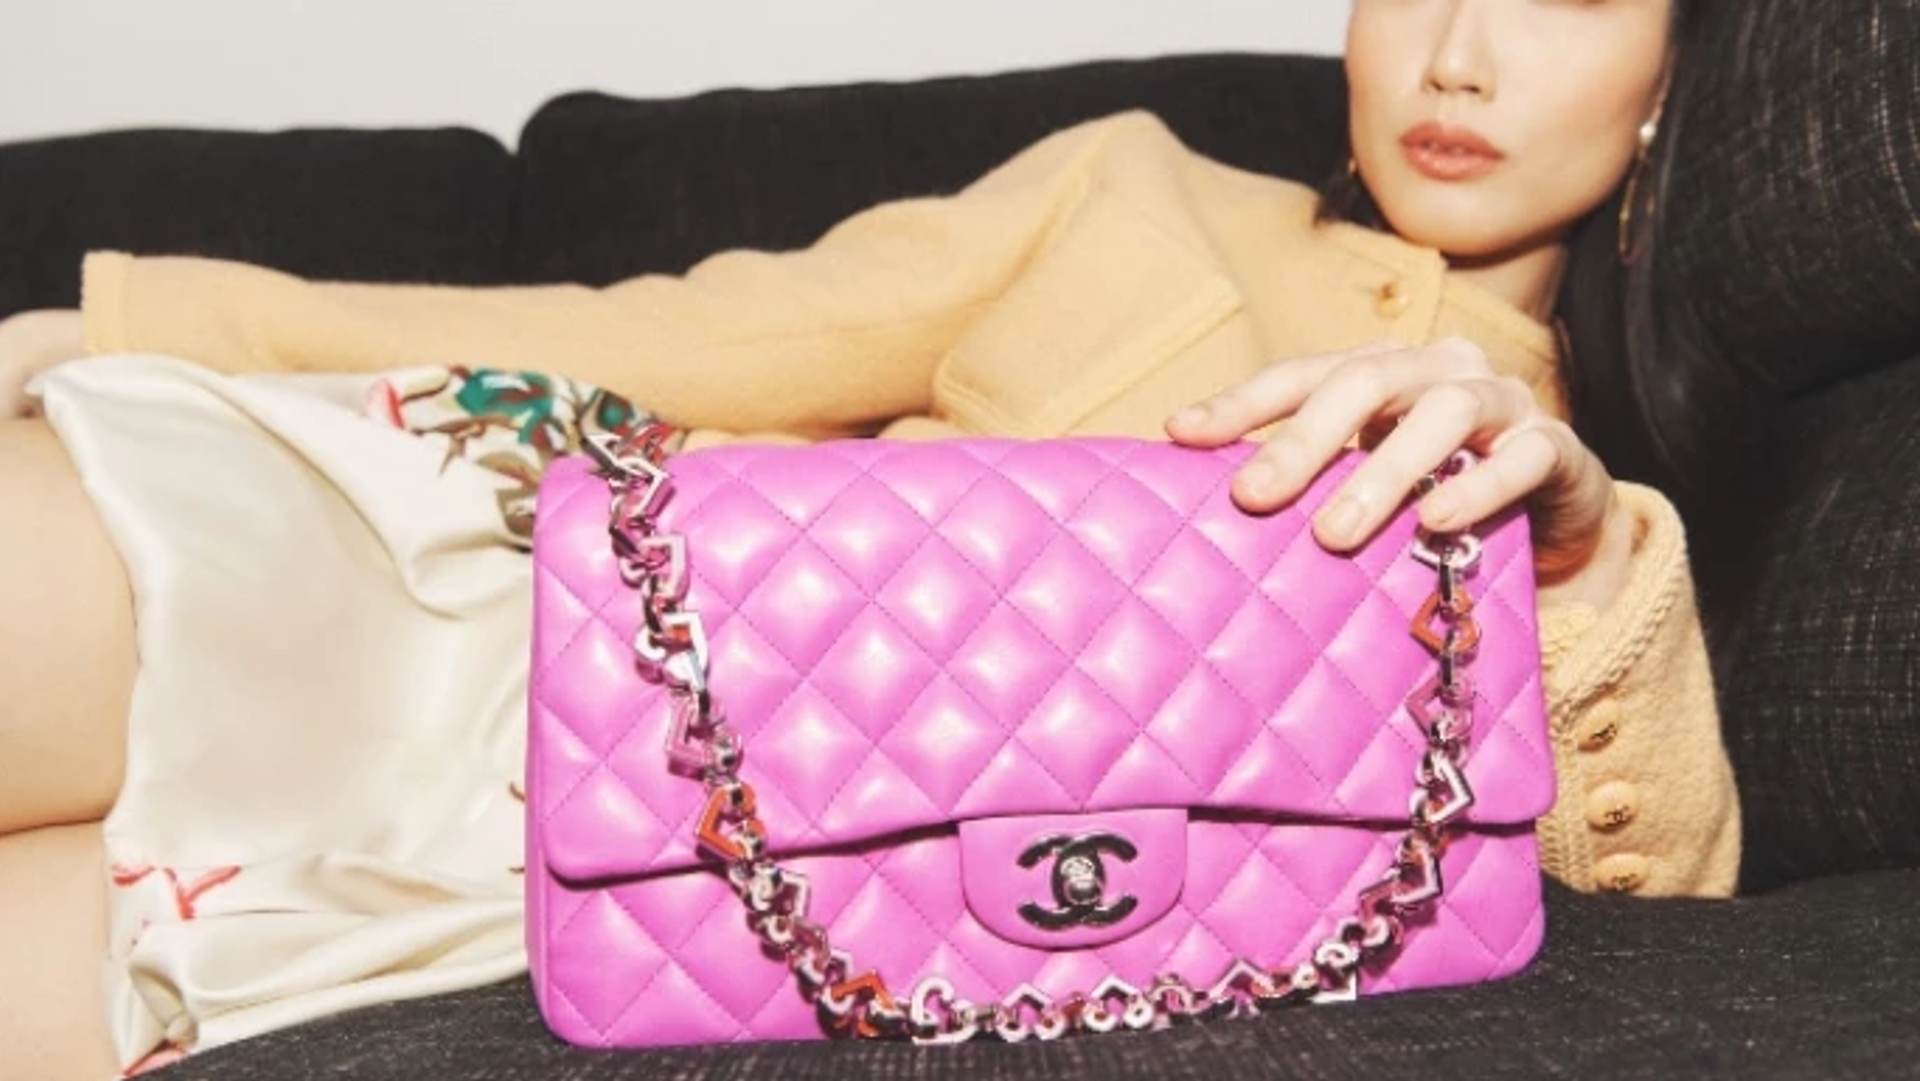 Be careful those investing in the booming handbag market